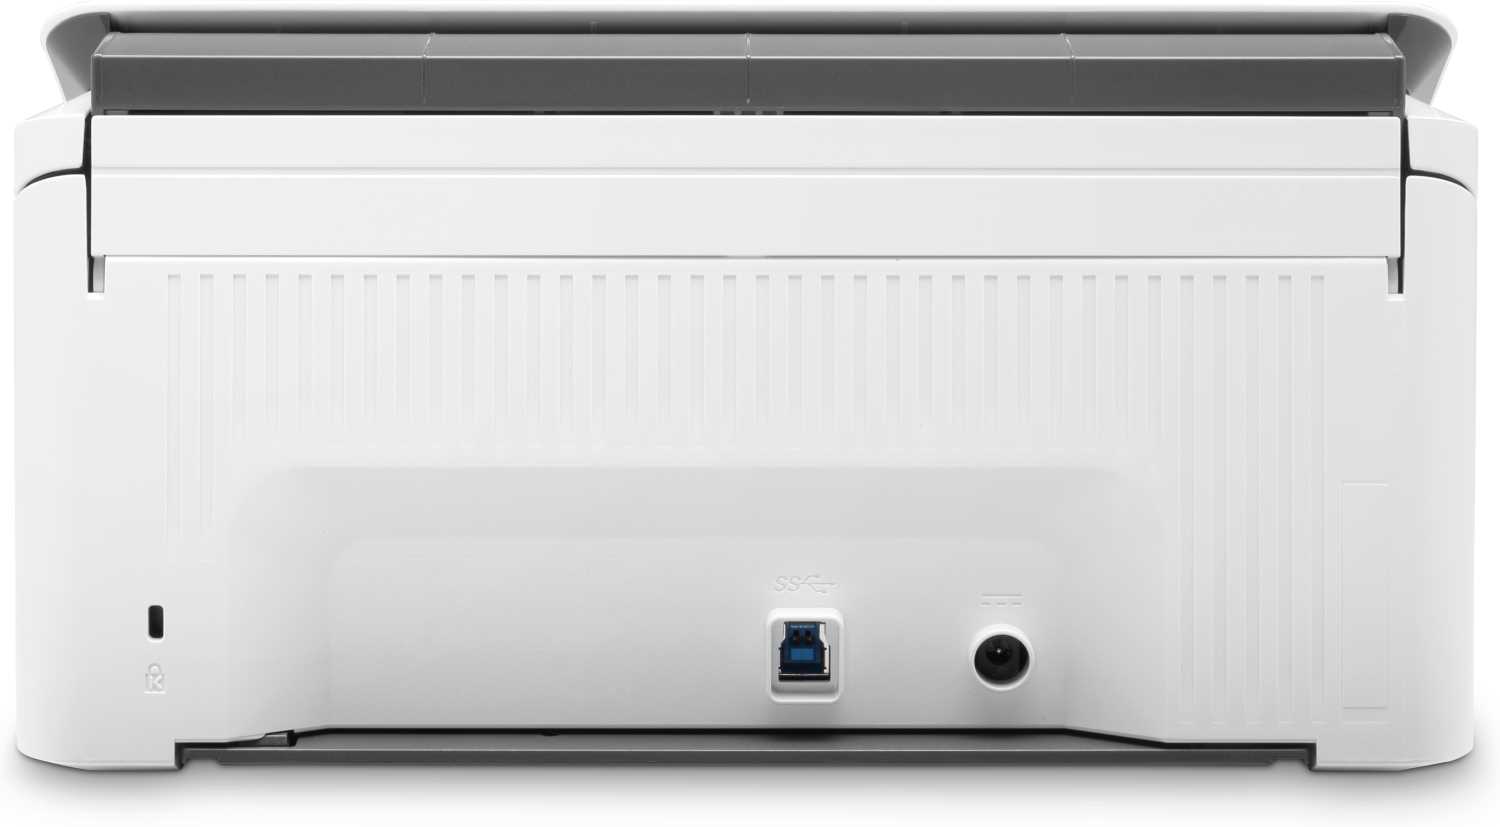 Сканер HP 6FW06A ScanJet Pro 2000 s2 (A4) 600x600 dpi, 48 bit, ADF (50 pages), 35 ppm,USB 3.0, Duty cycle 3500 pages